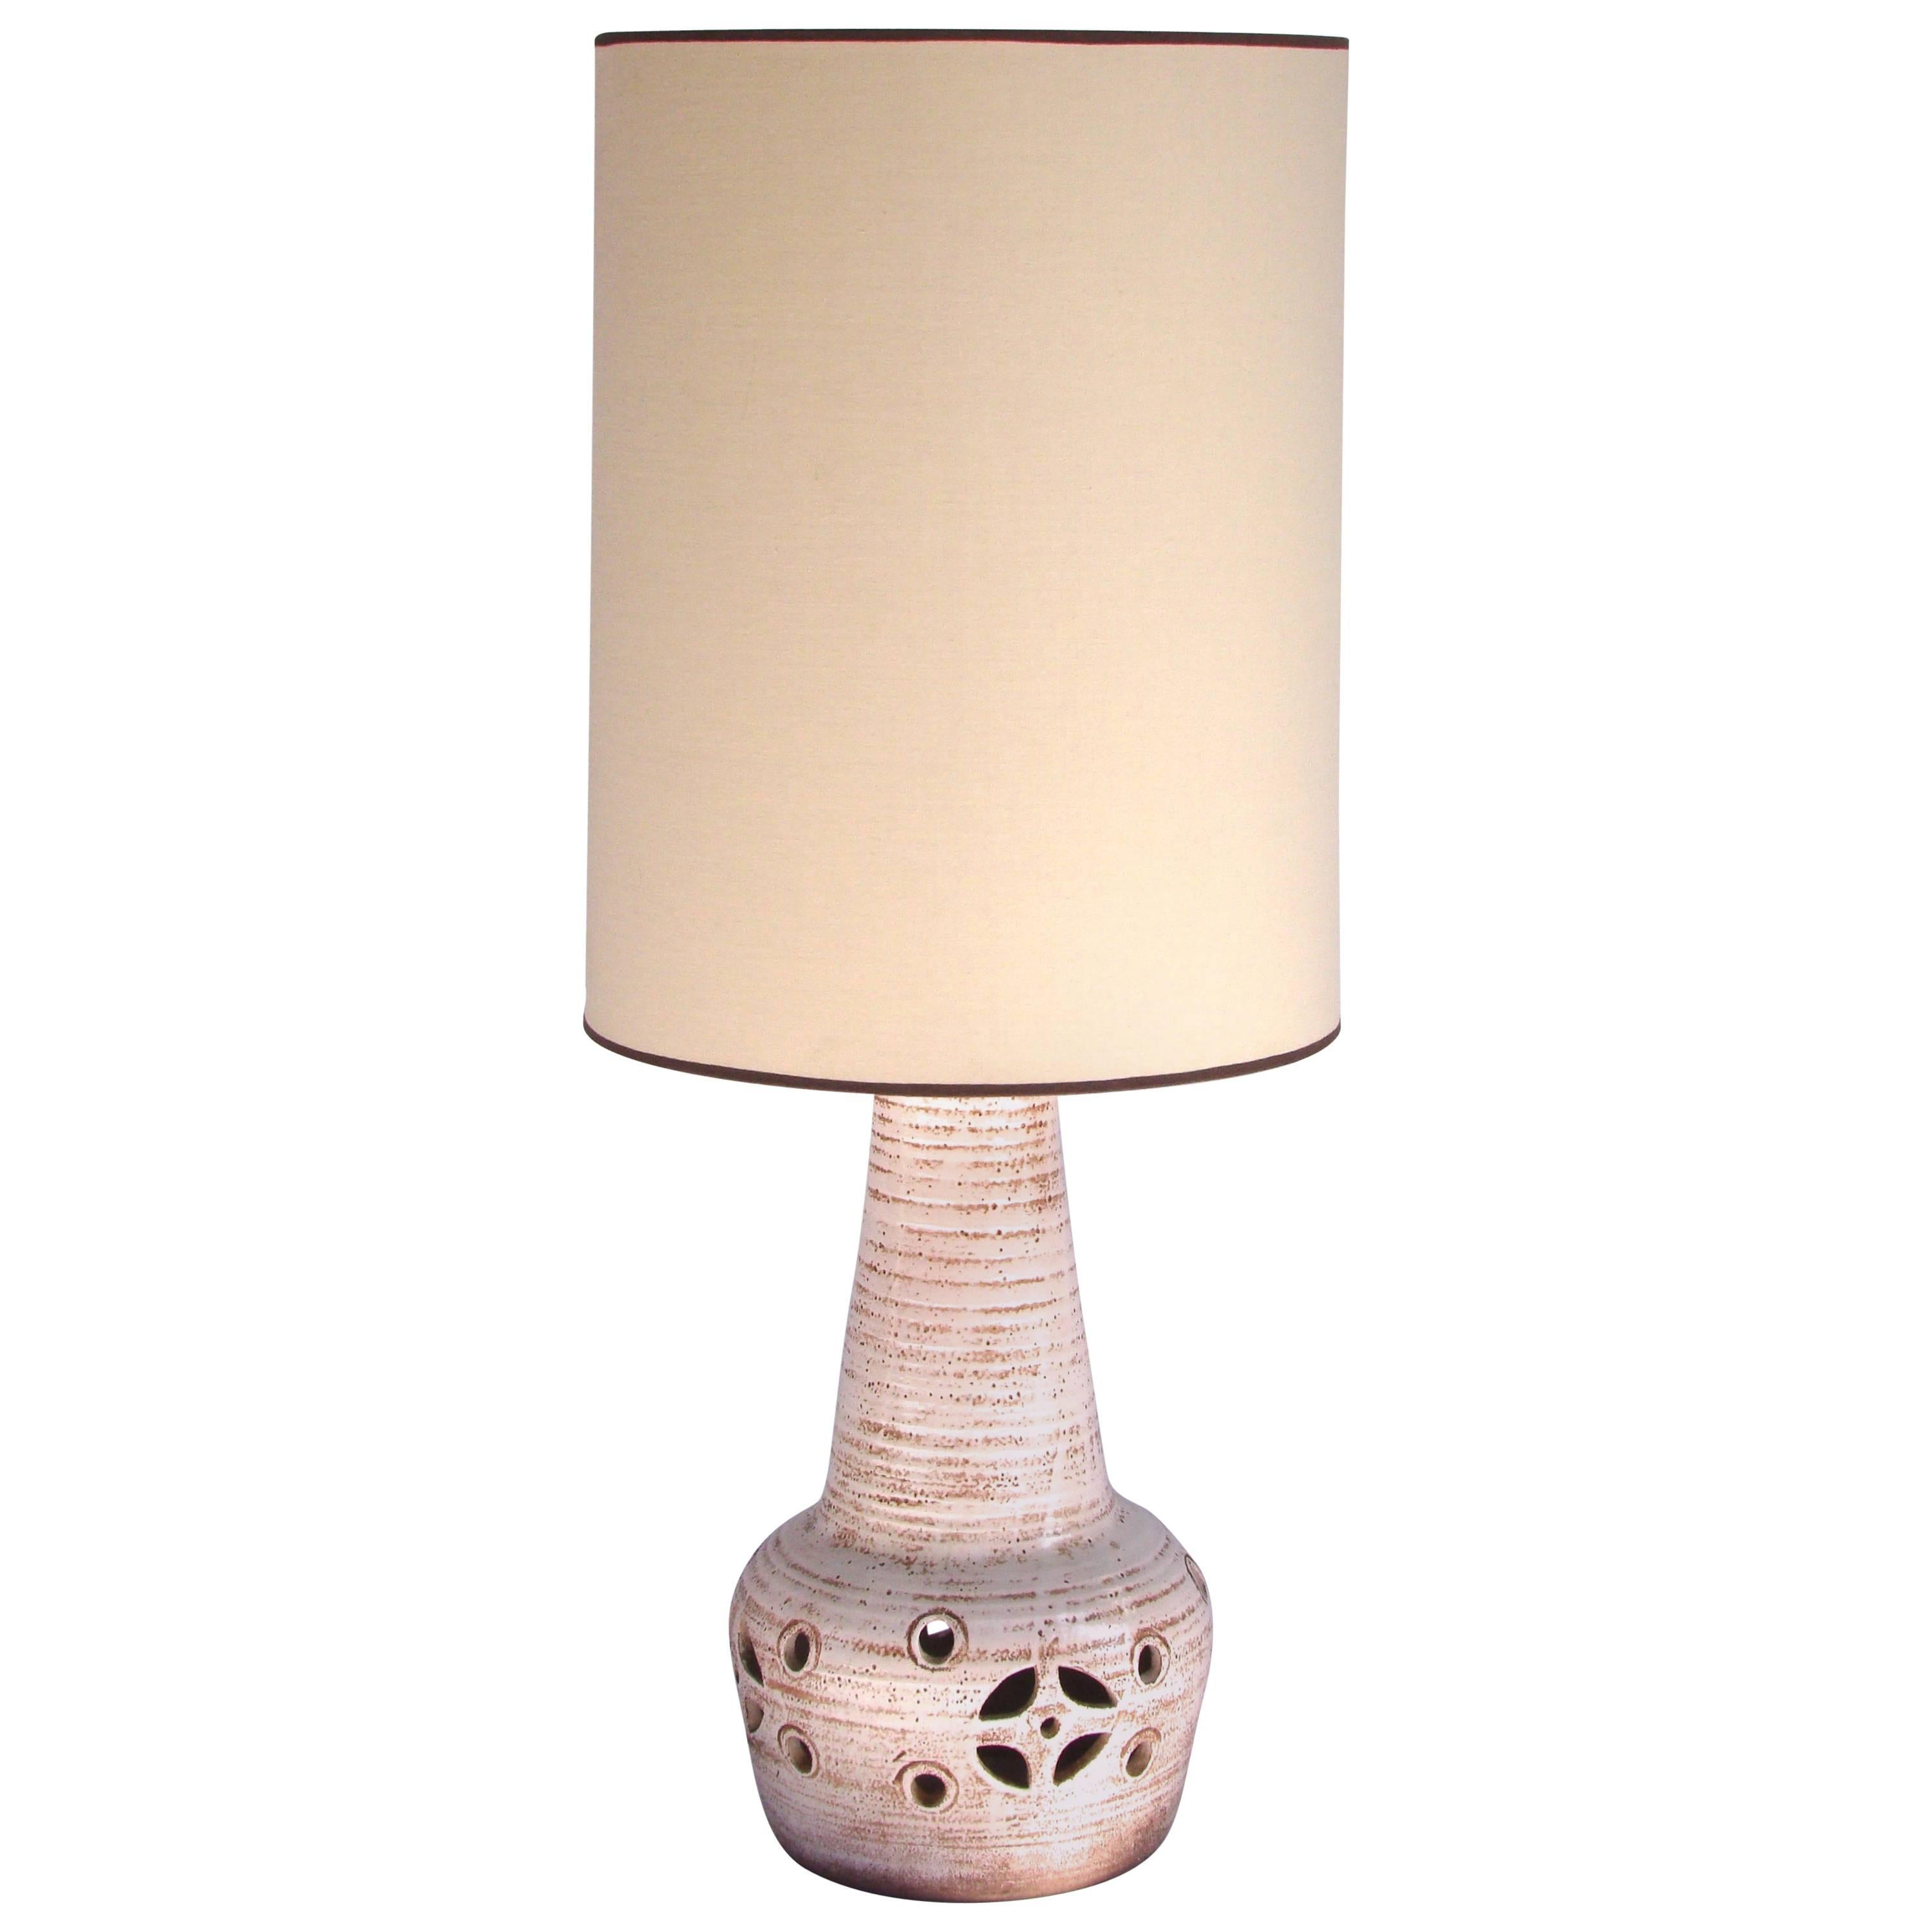 1960s Ceramic Table Lamp by Accolay For Sale